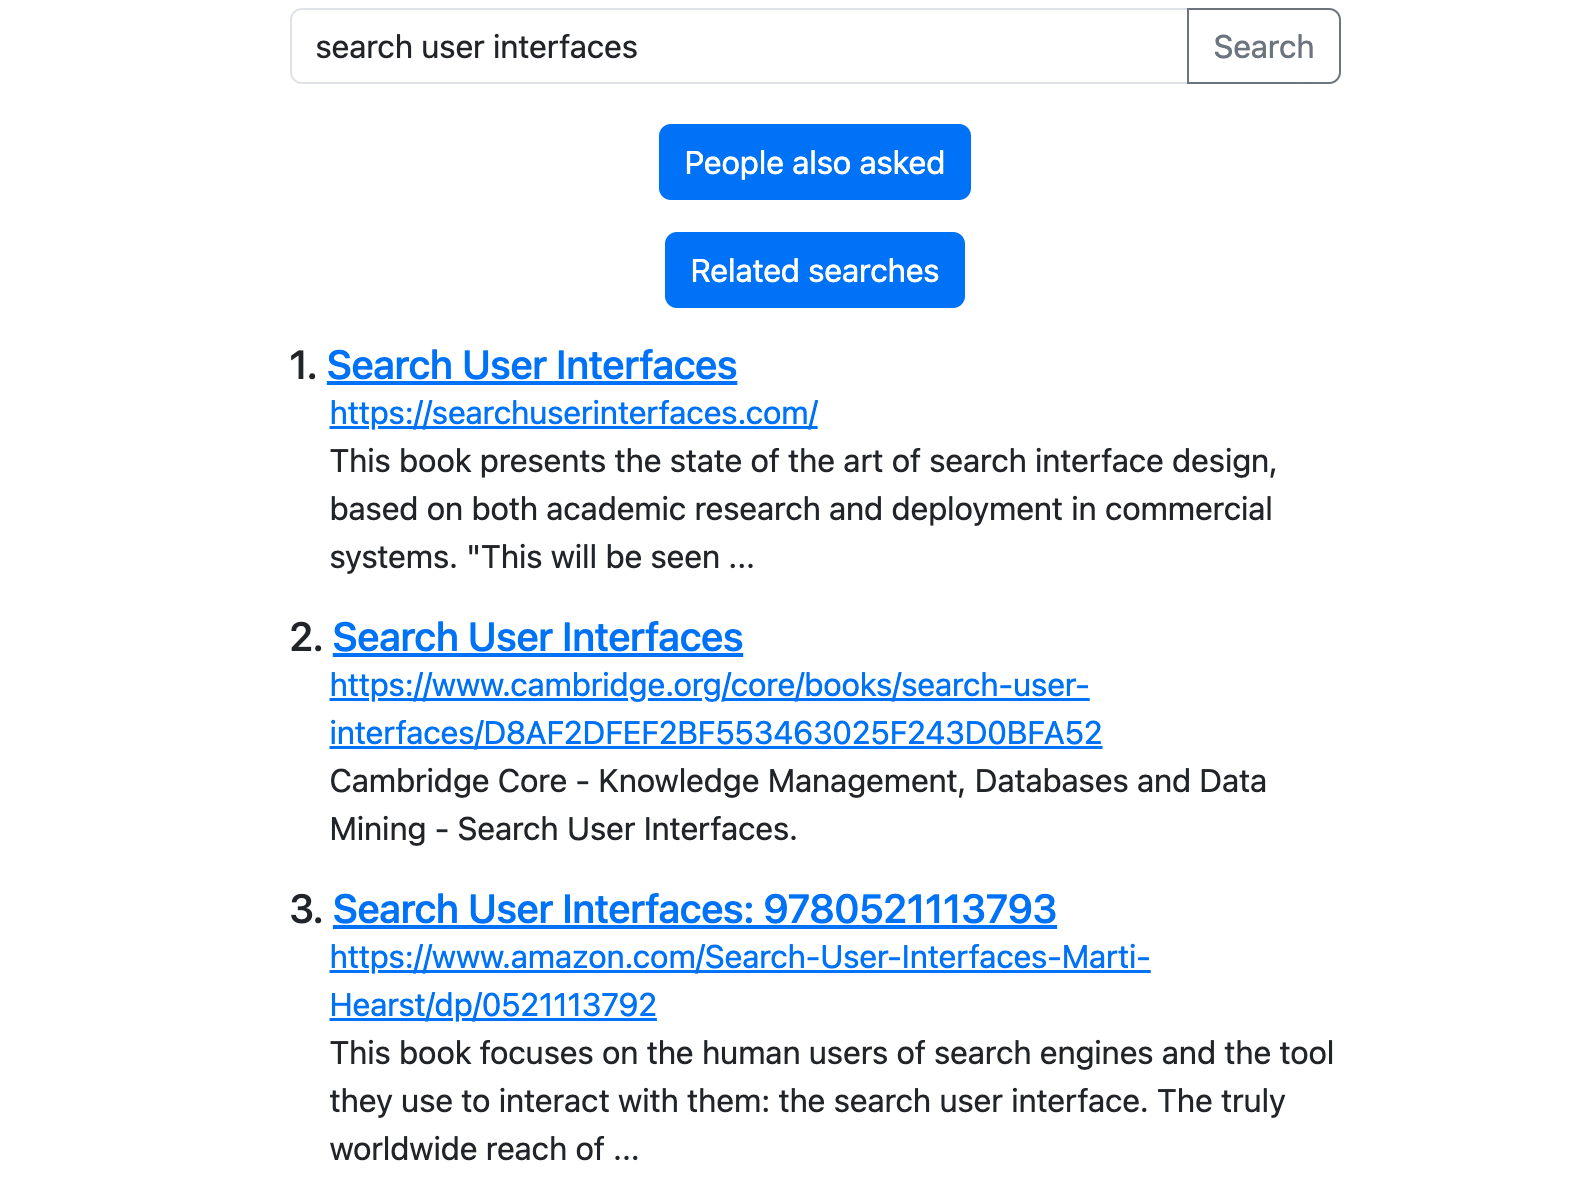 Searching [search user interfaces] on Google w/ speedserper